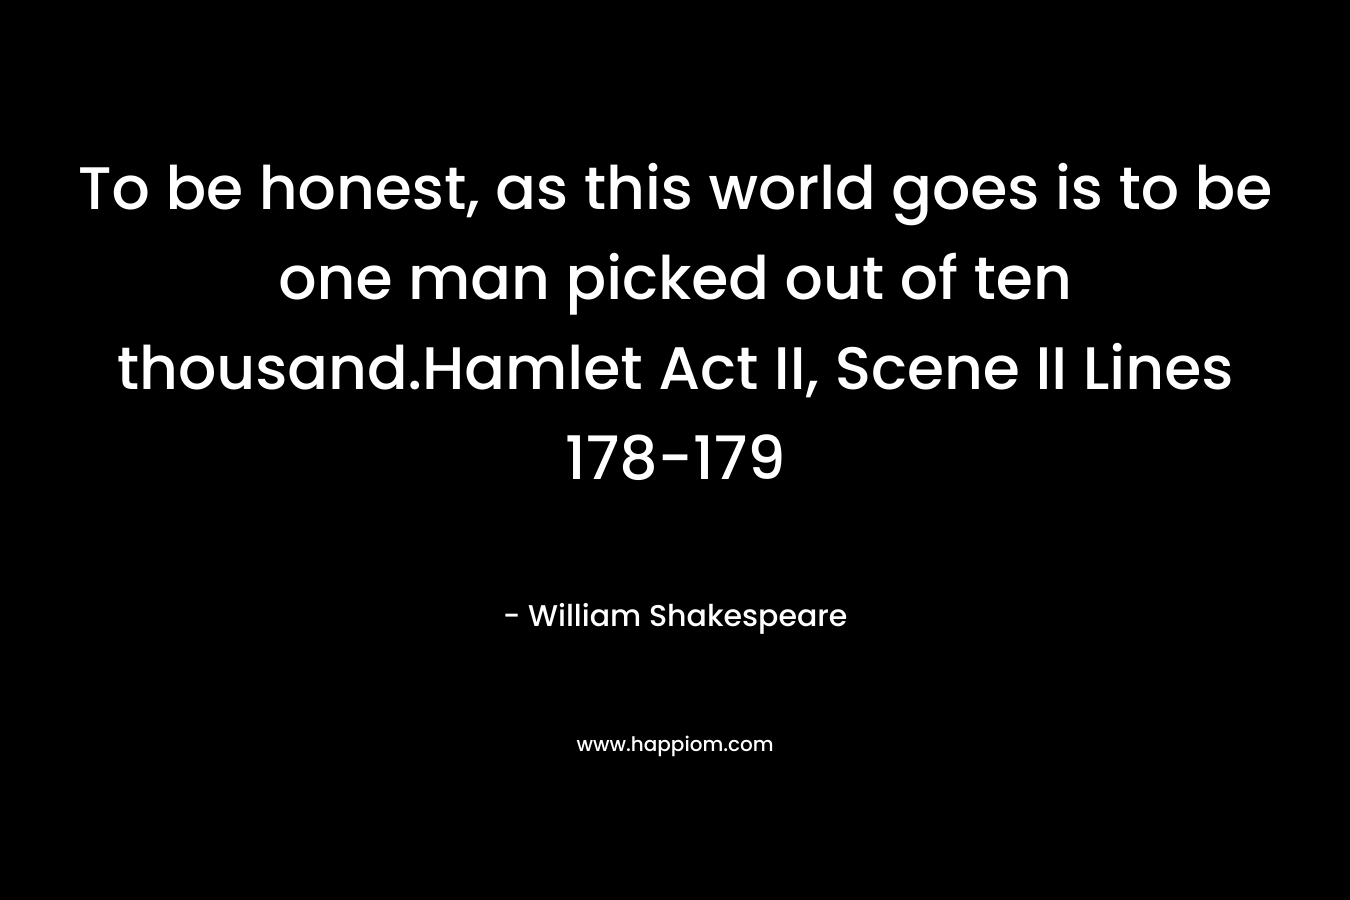 To be honest, as this world goes is to be one man picked out of ten thousand.Hamlet Act II, Scene II Lines 178-179 – William Shakespeare